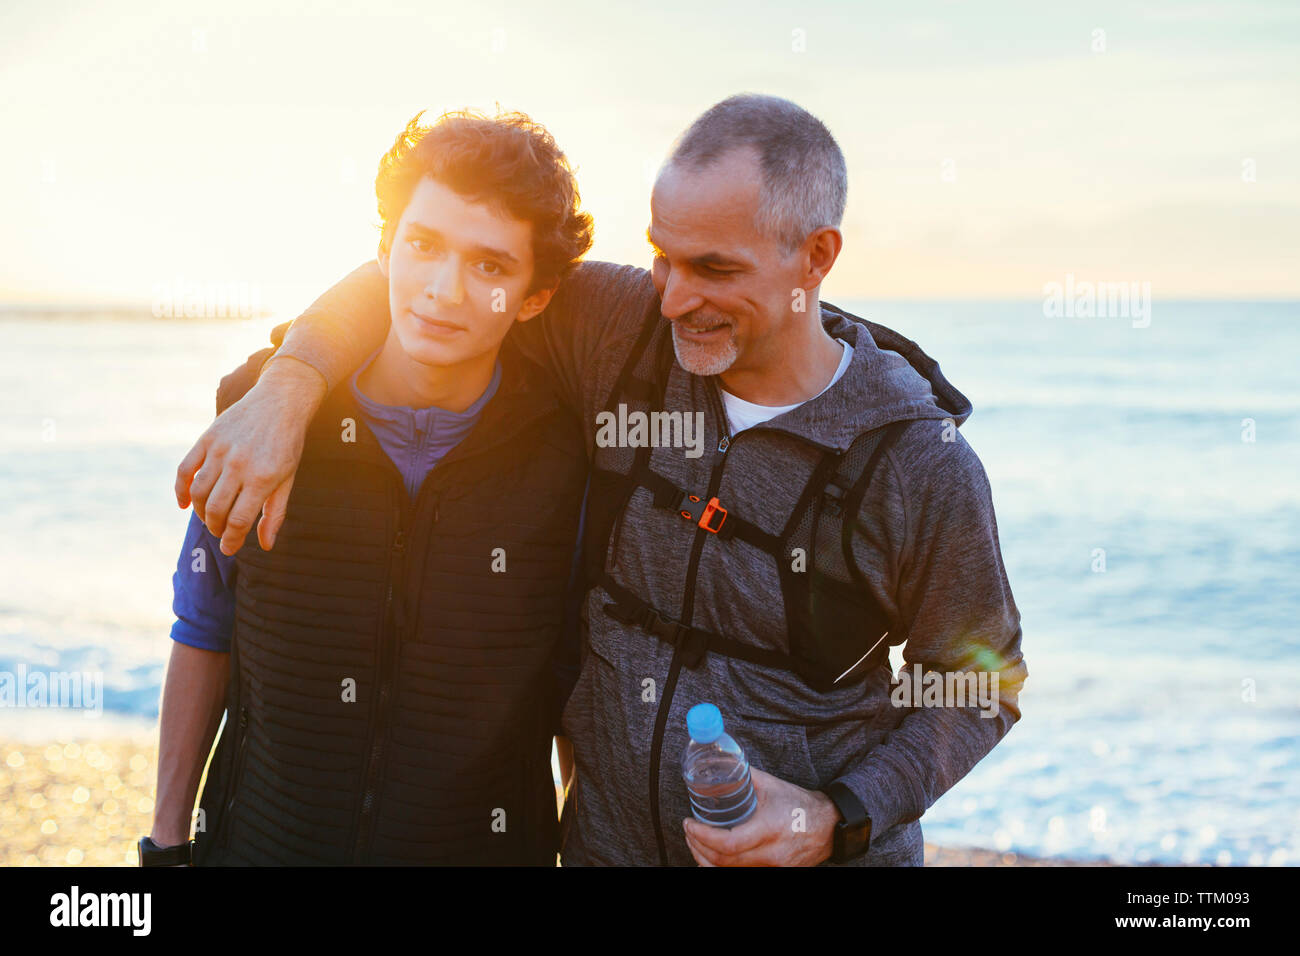 Portrait of son with father's arm around shoulder against sea during sunset Stock Photo